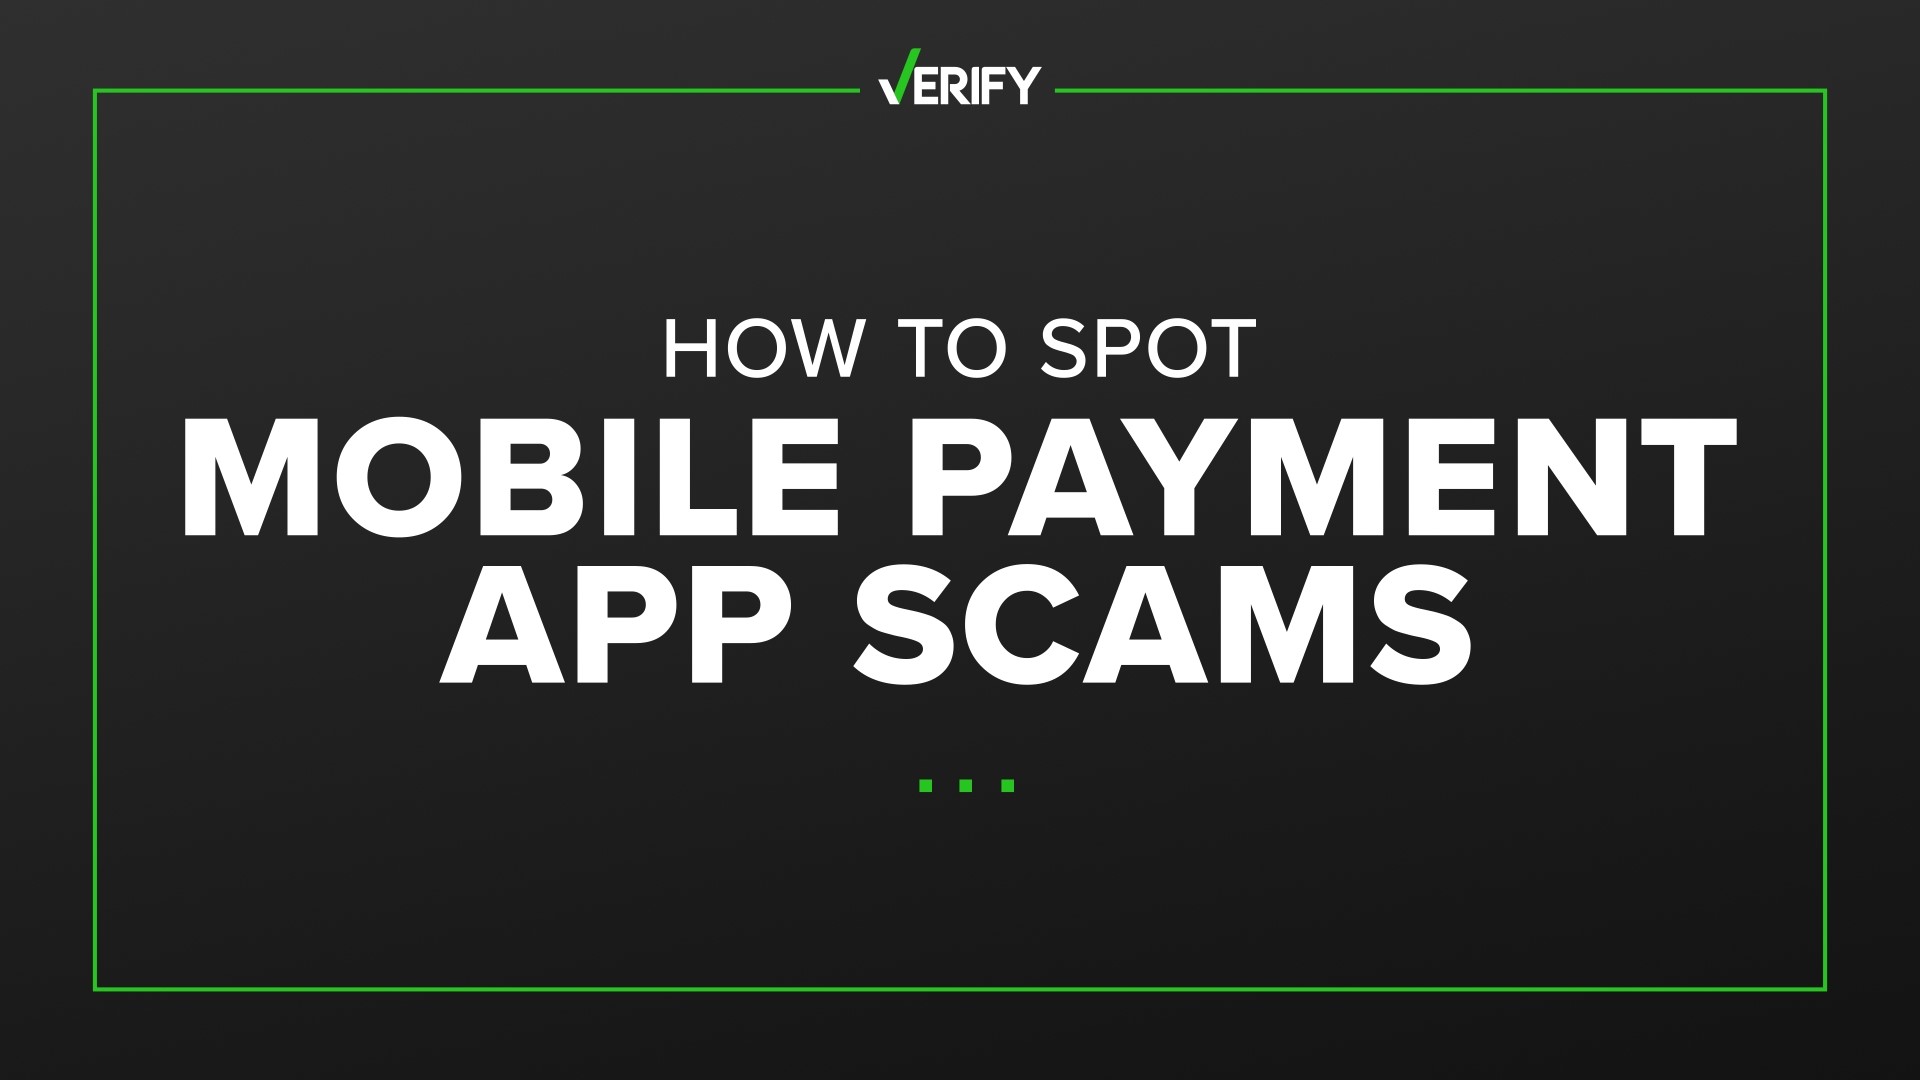 Mobile peer-to-peer payment app scams are on the rise as more Americans use contactless payment options. Here are a few ways to identify and avoid payment app scams.